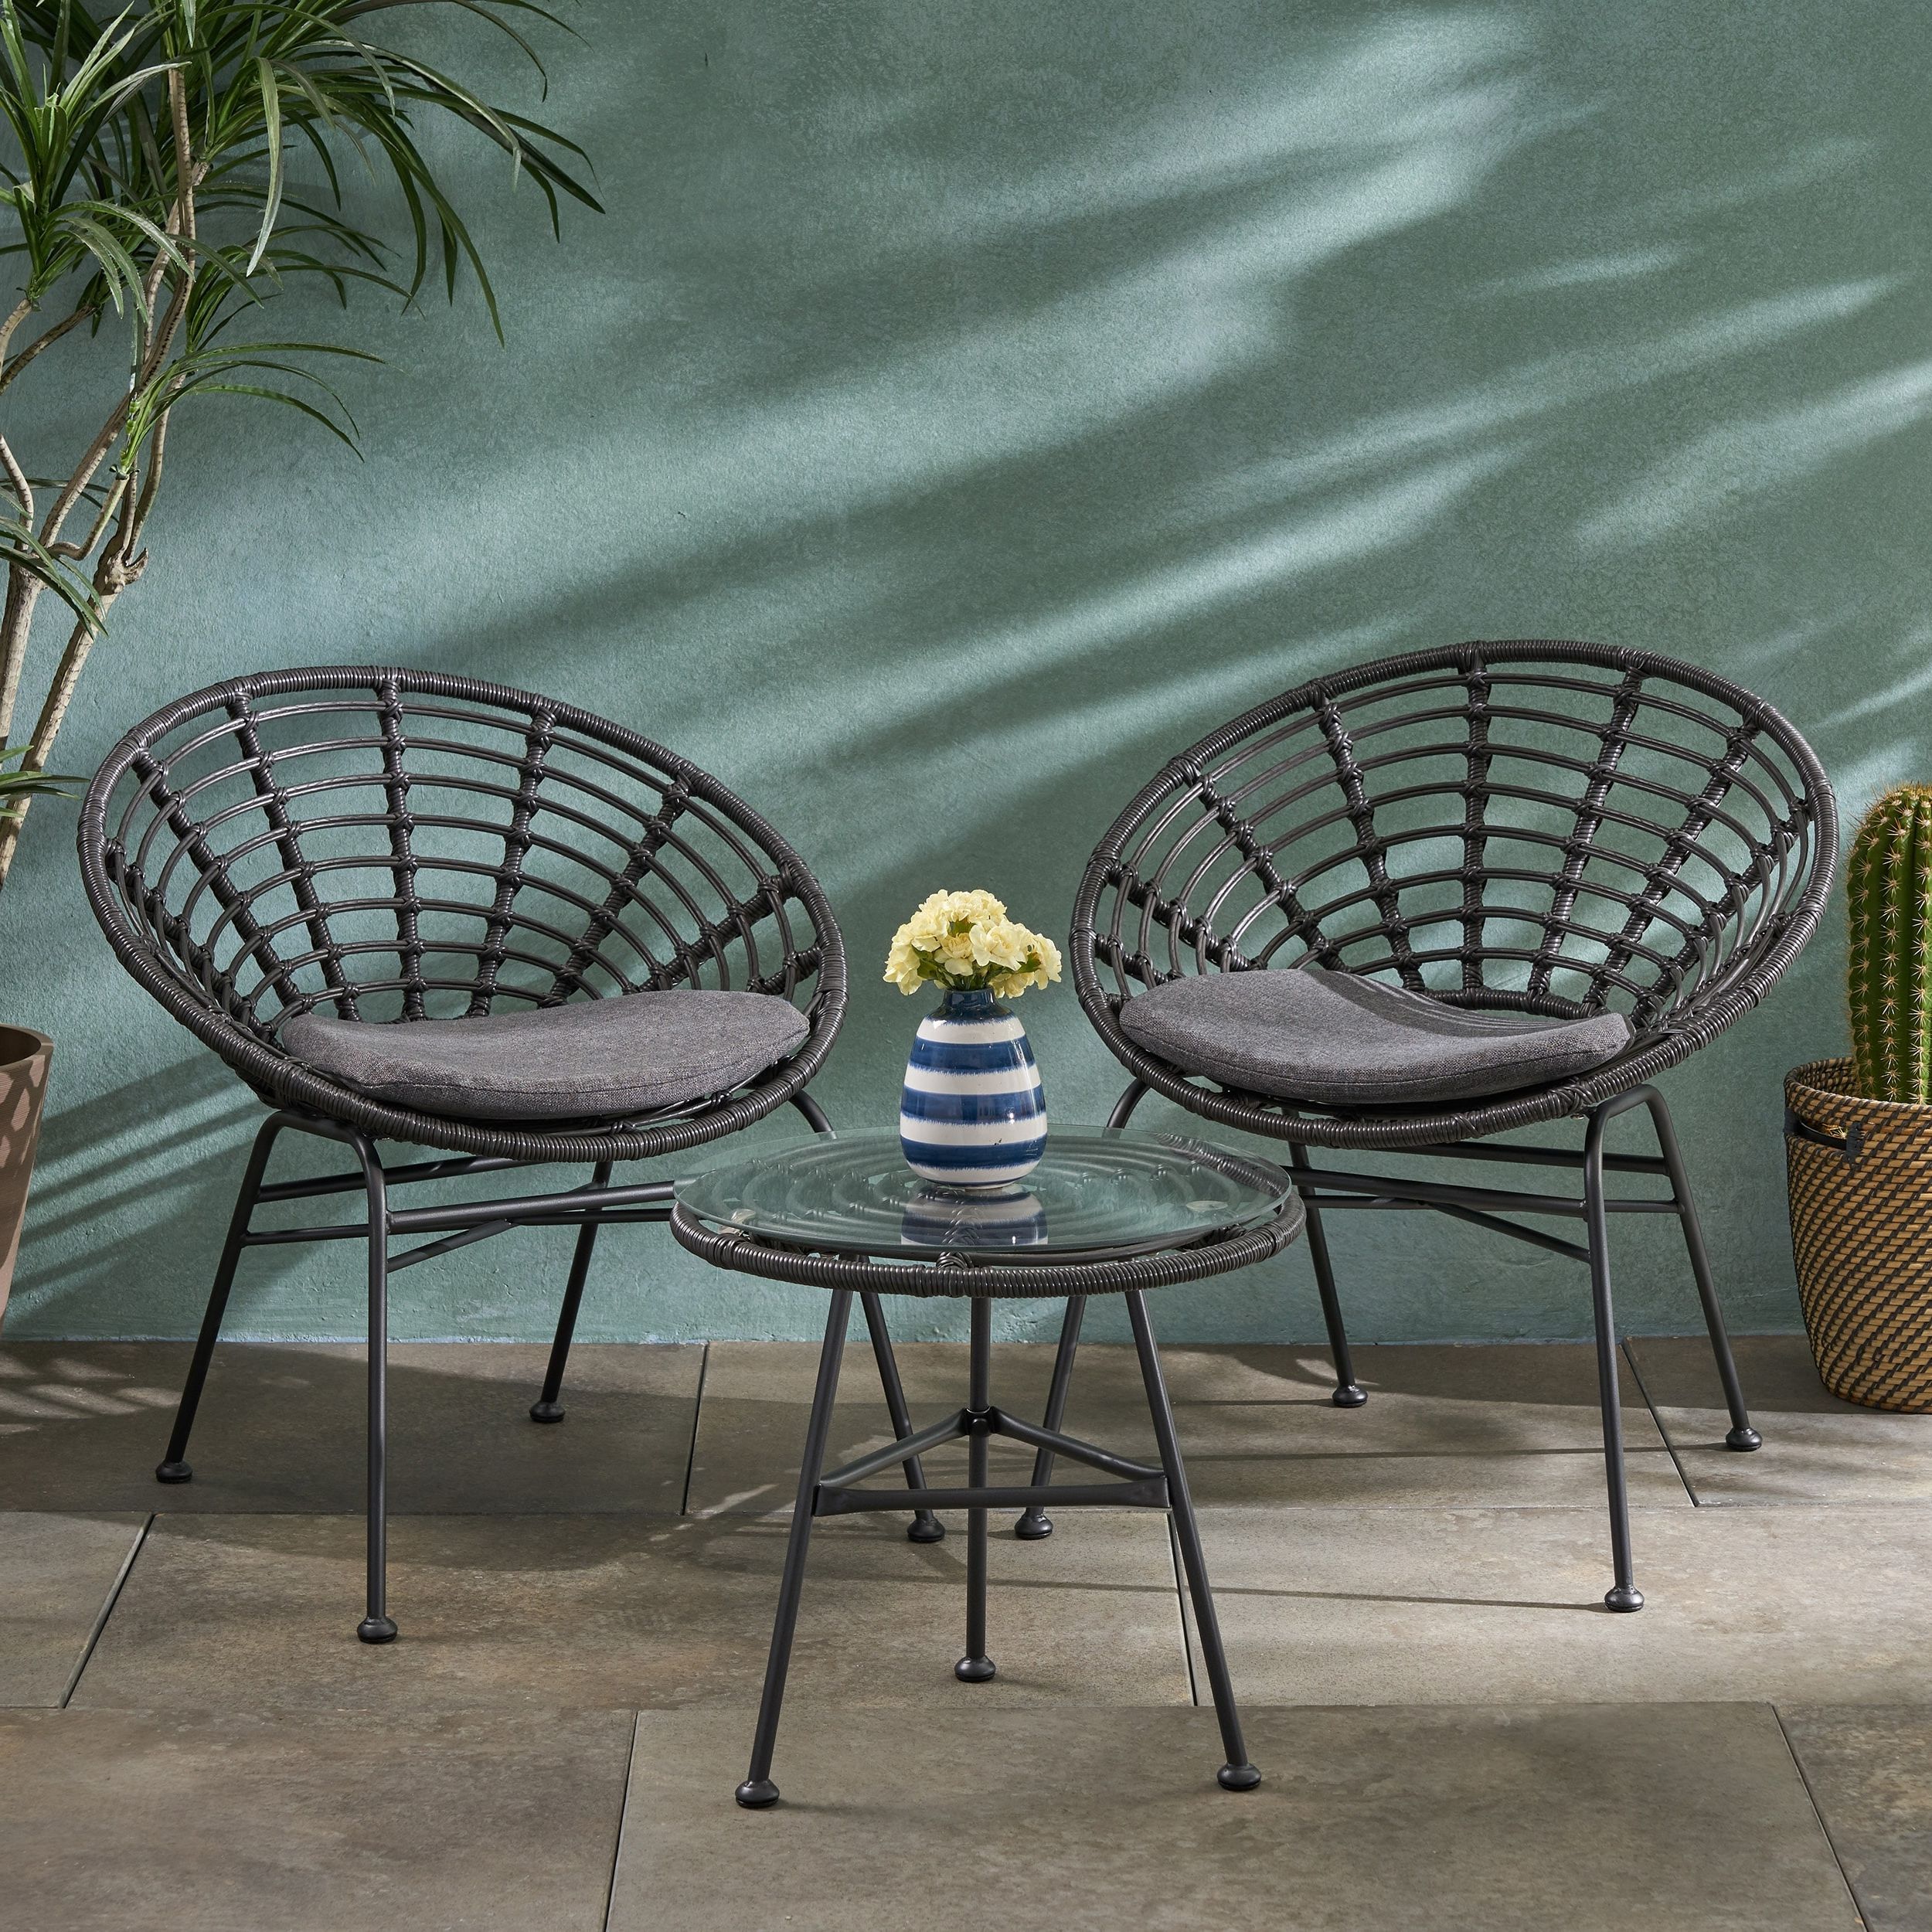 Pigment Outdoor Modern Boho 2 Seater Wicker Chat Set With Side Table Christopher Knight Home – On Sale – Overstock – 28422729 Inside Fashionable 3 Piece Outdoor Boho Wicker Chat Set (View 5 of 15)